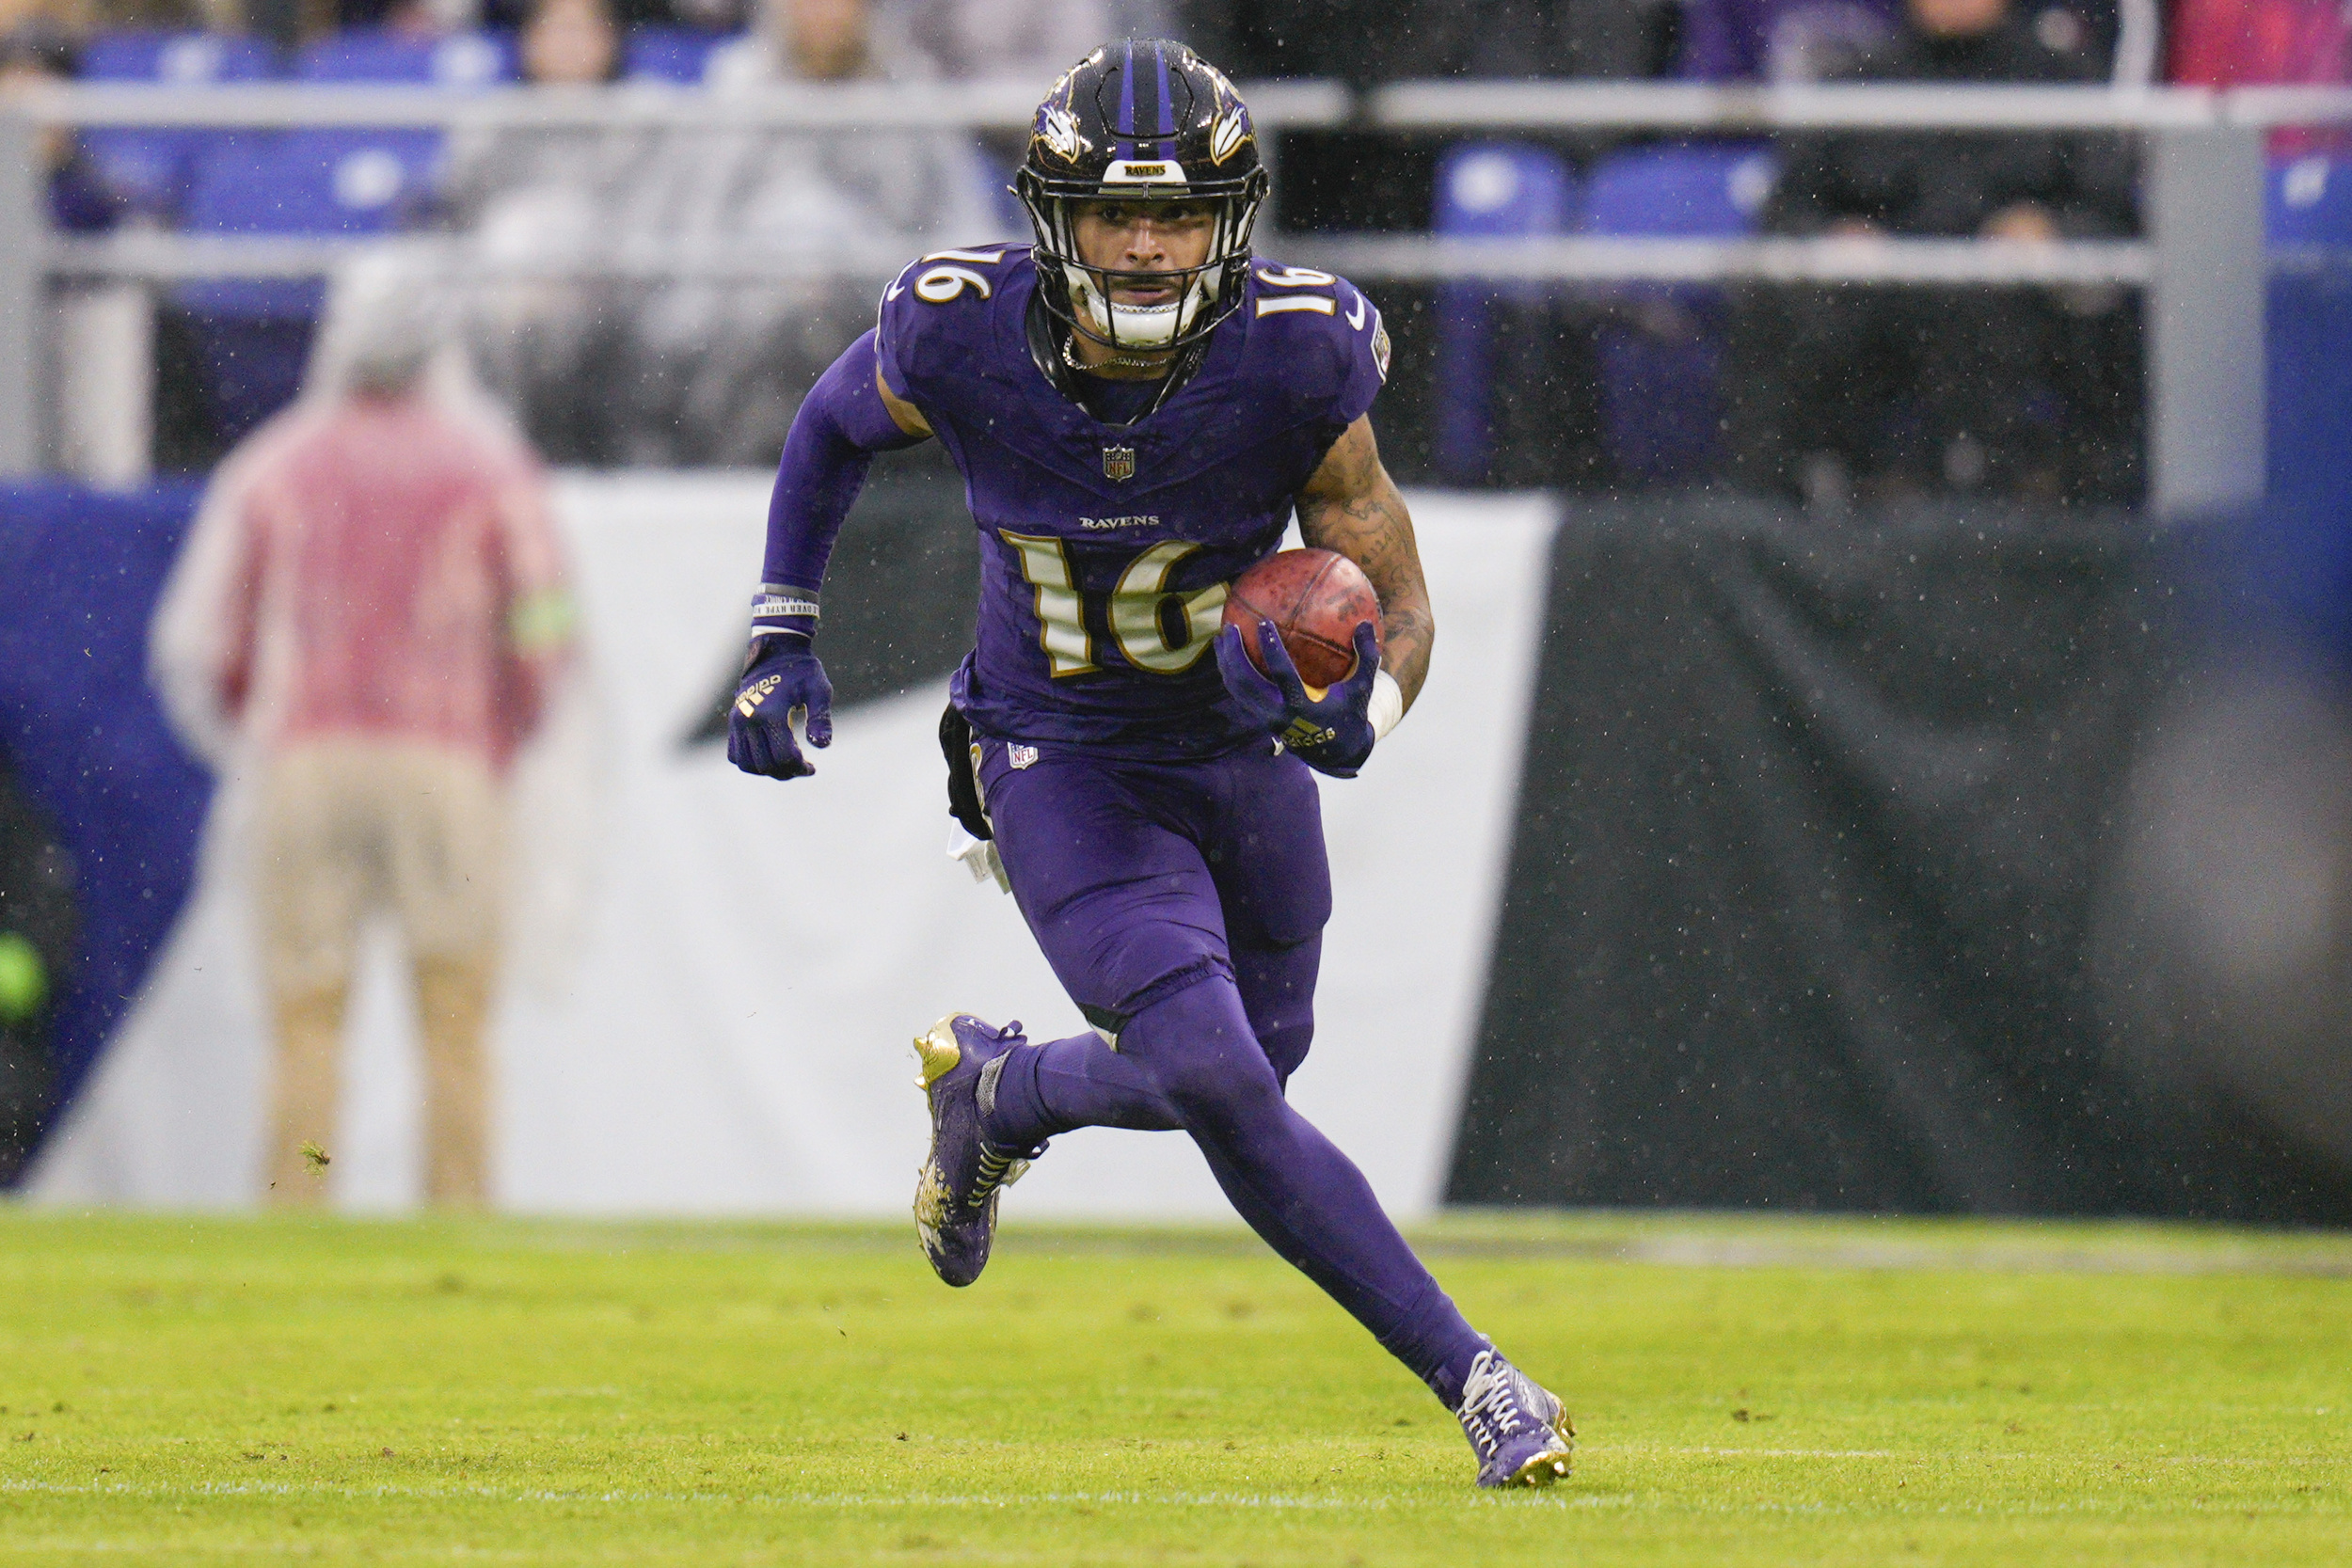 baltimore ravens offensive weapon might not play afc championship game; listed as questionable